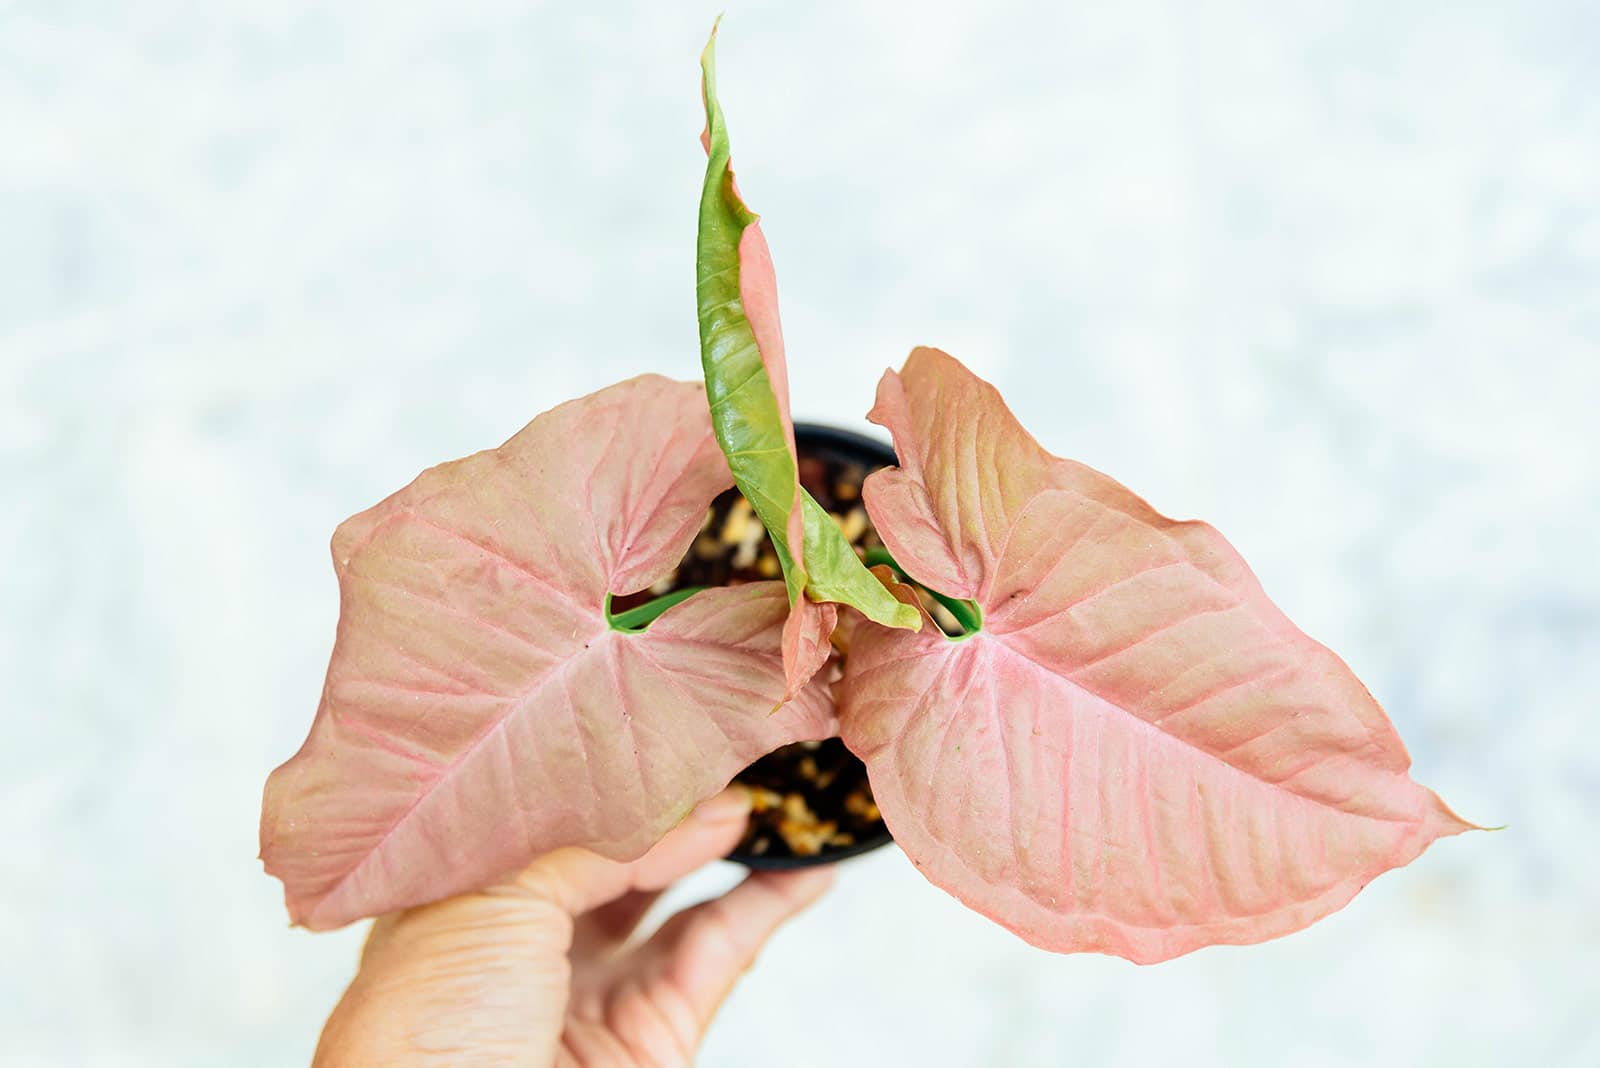 Hand holding a pink Syngonium podophyllum plant against a mottled white and gray background